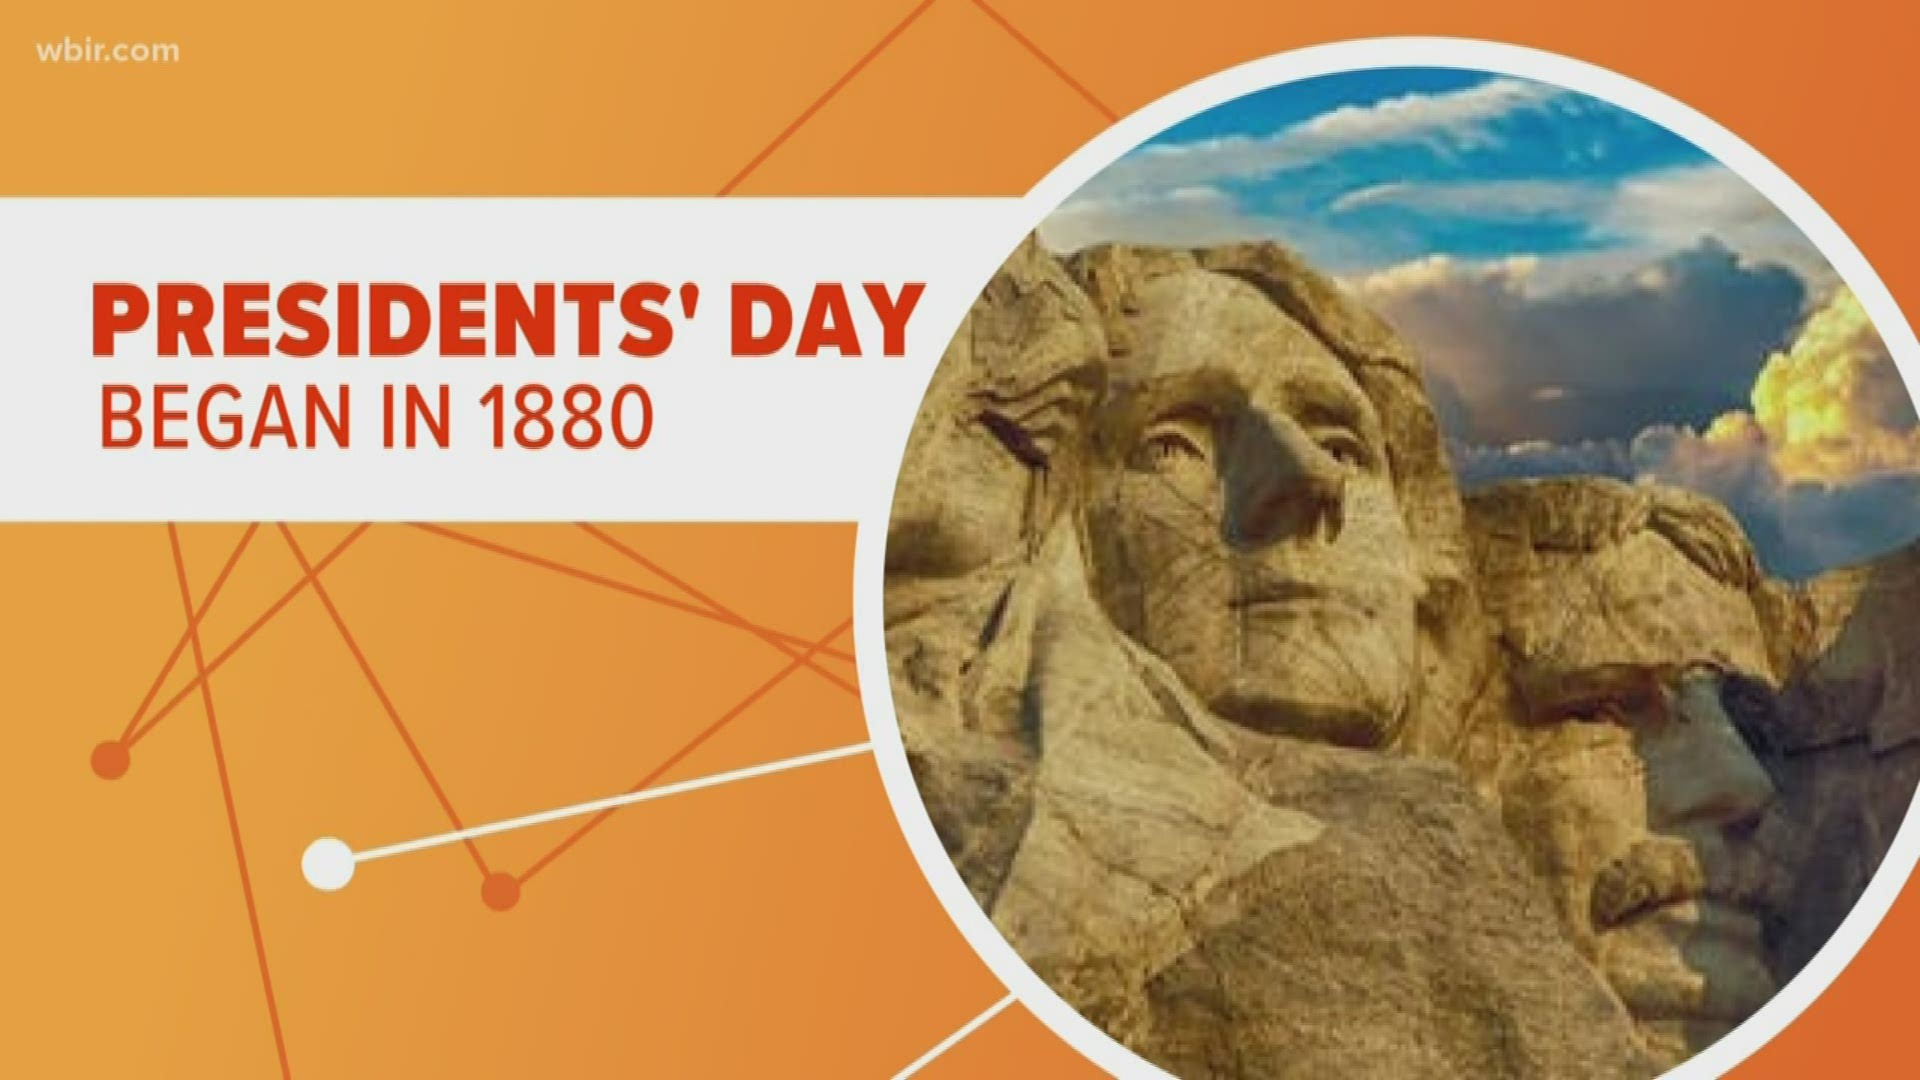 We connect the dots on the origin of President's Day, and what the holiday means to people today!